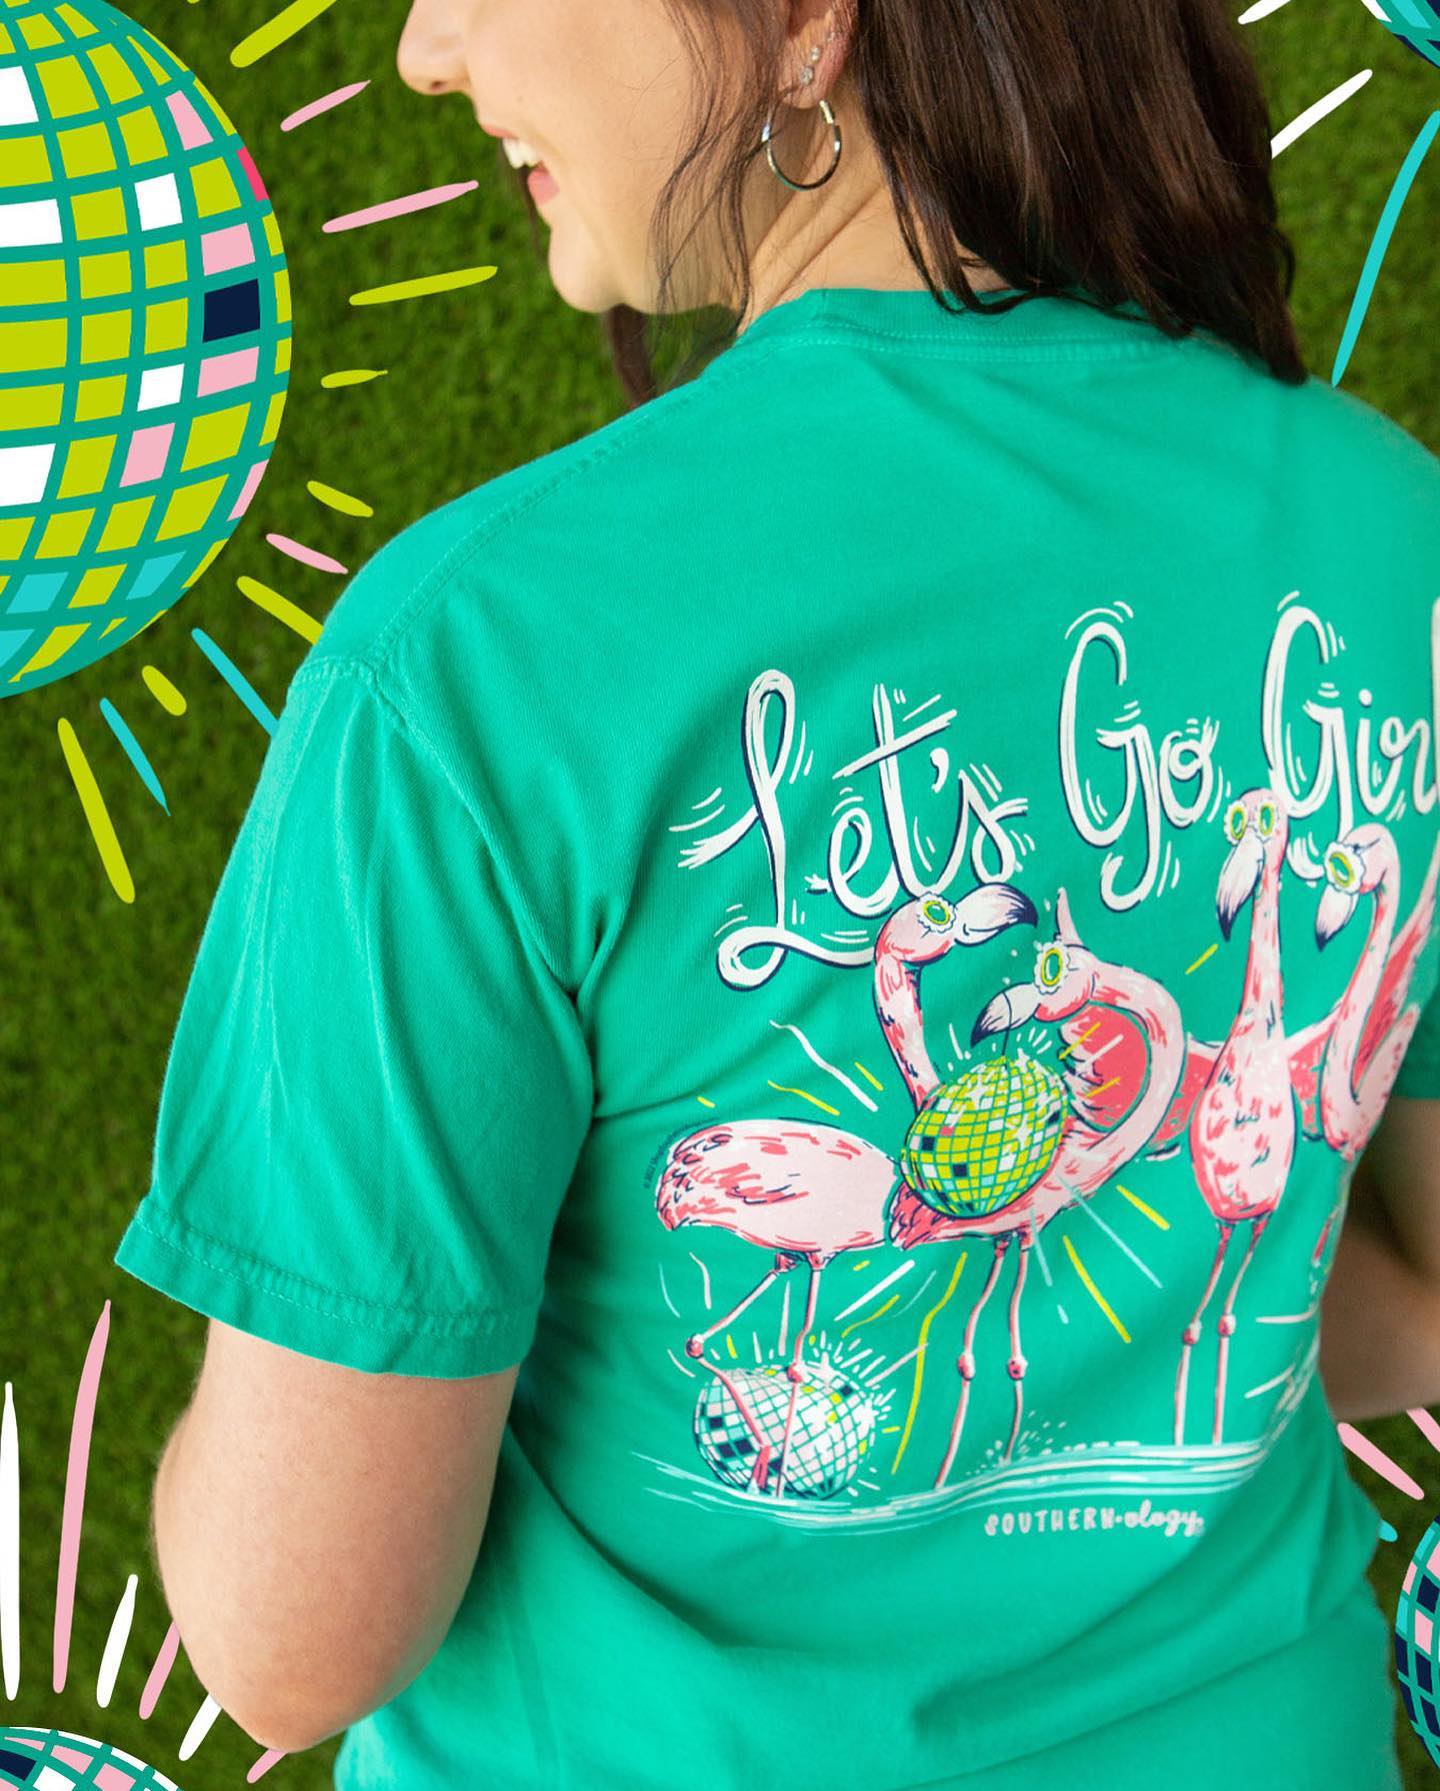 Let's Go Girls! Southernology T-shirt